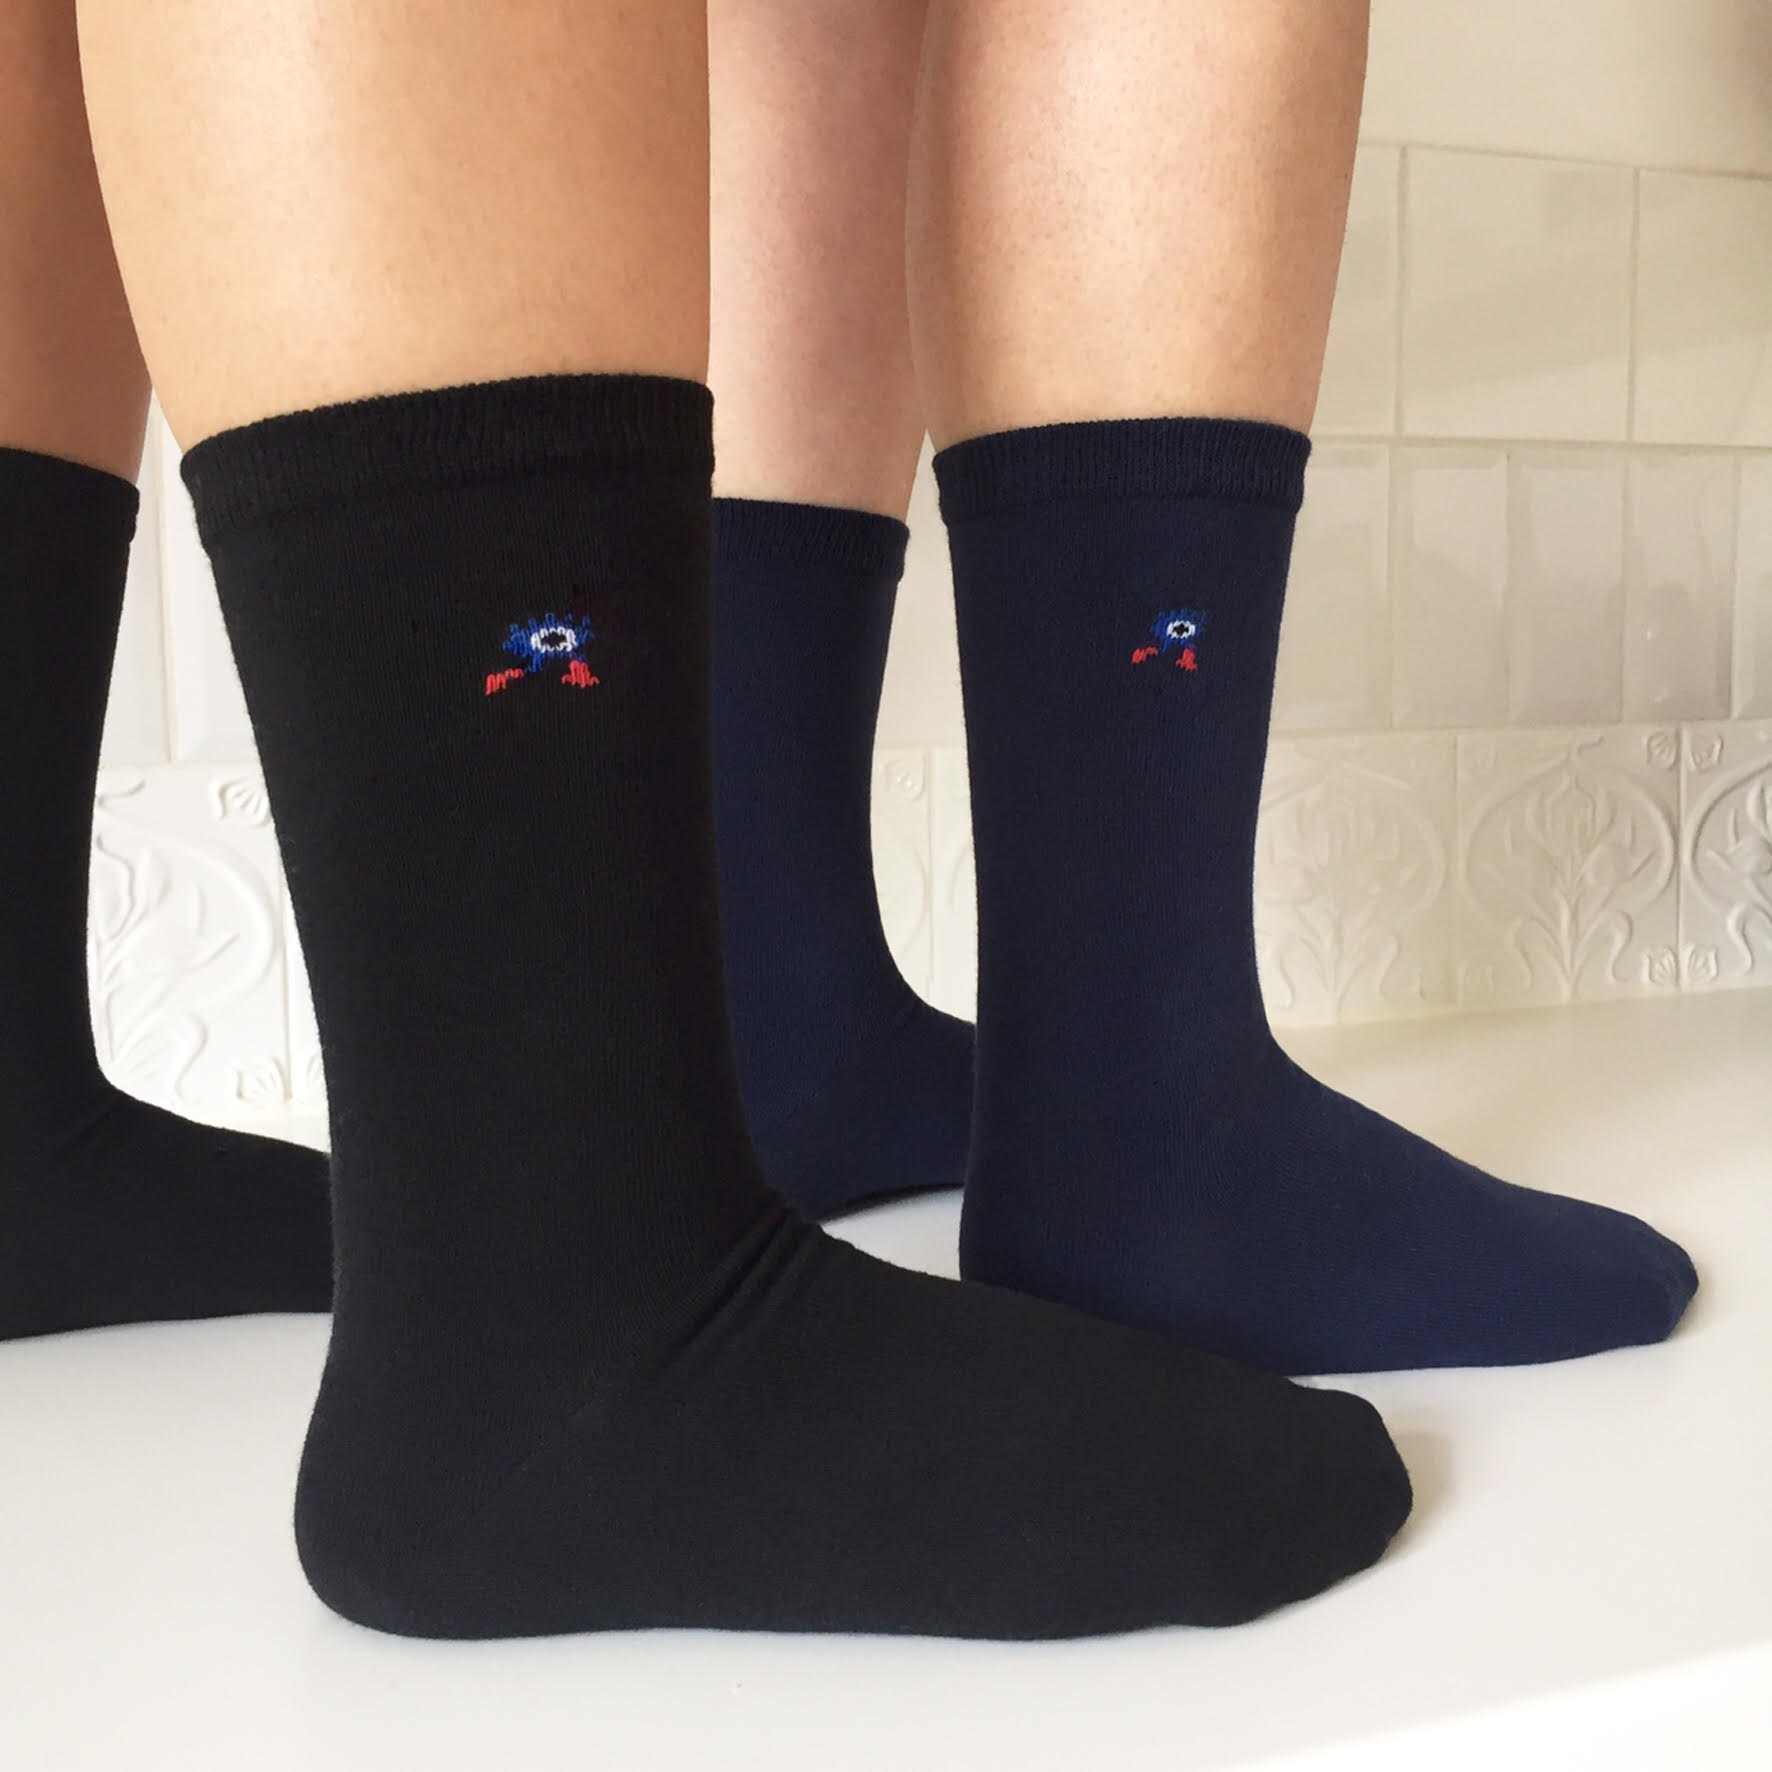 Sacha, des chaussettes Made in France